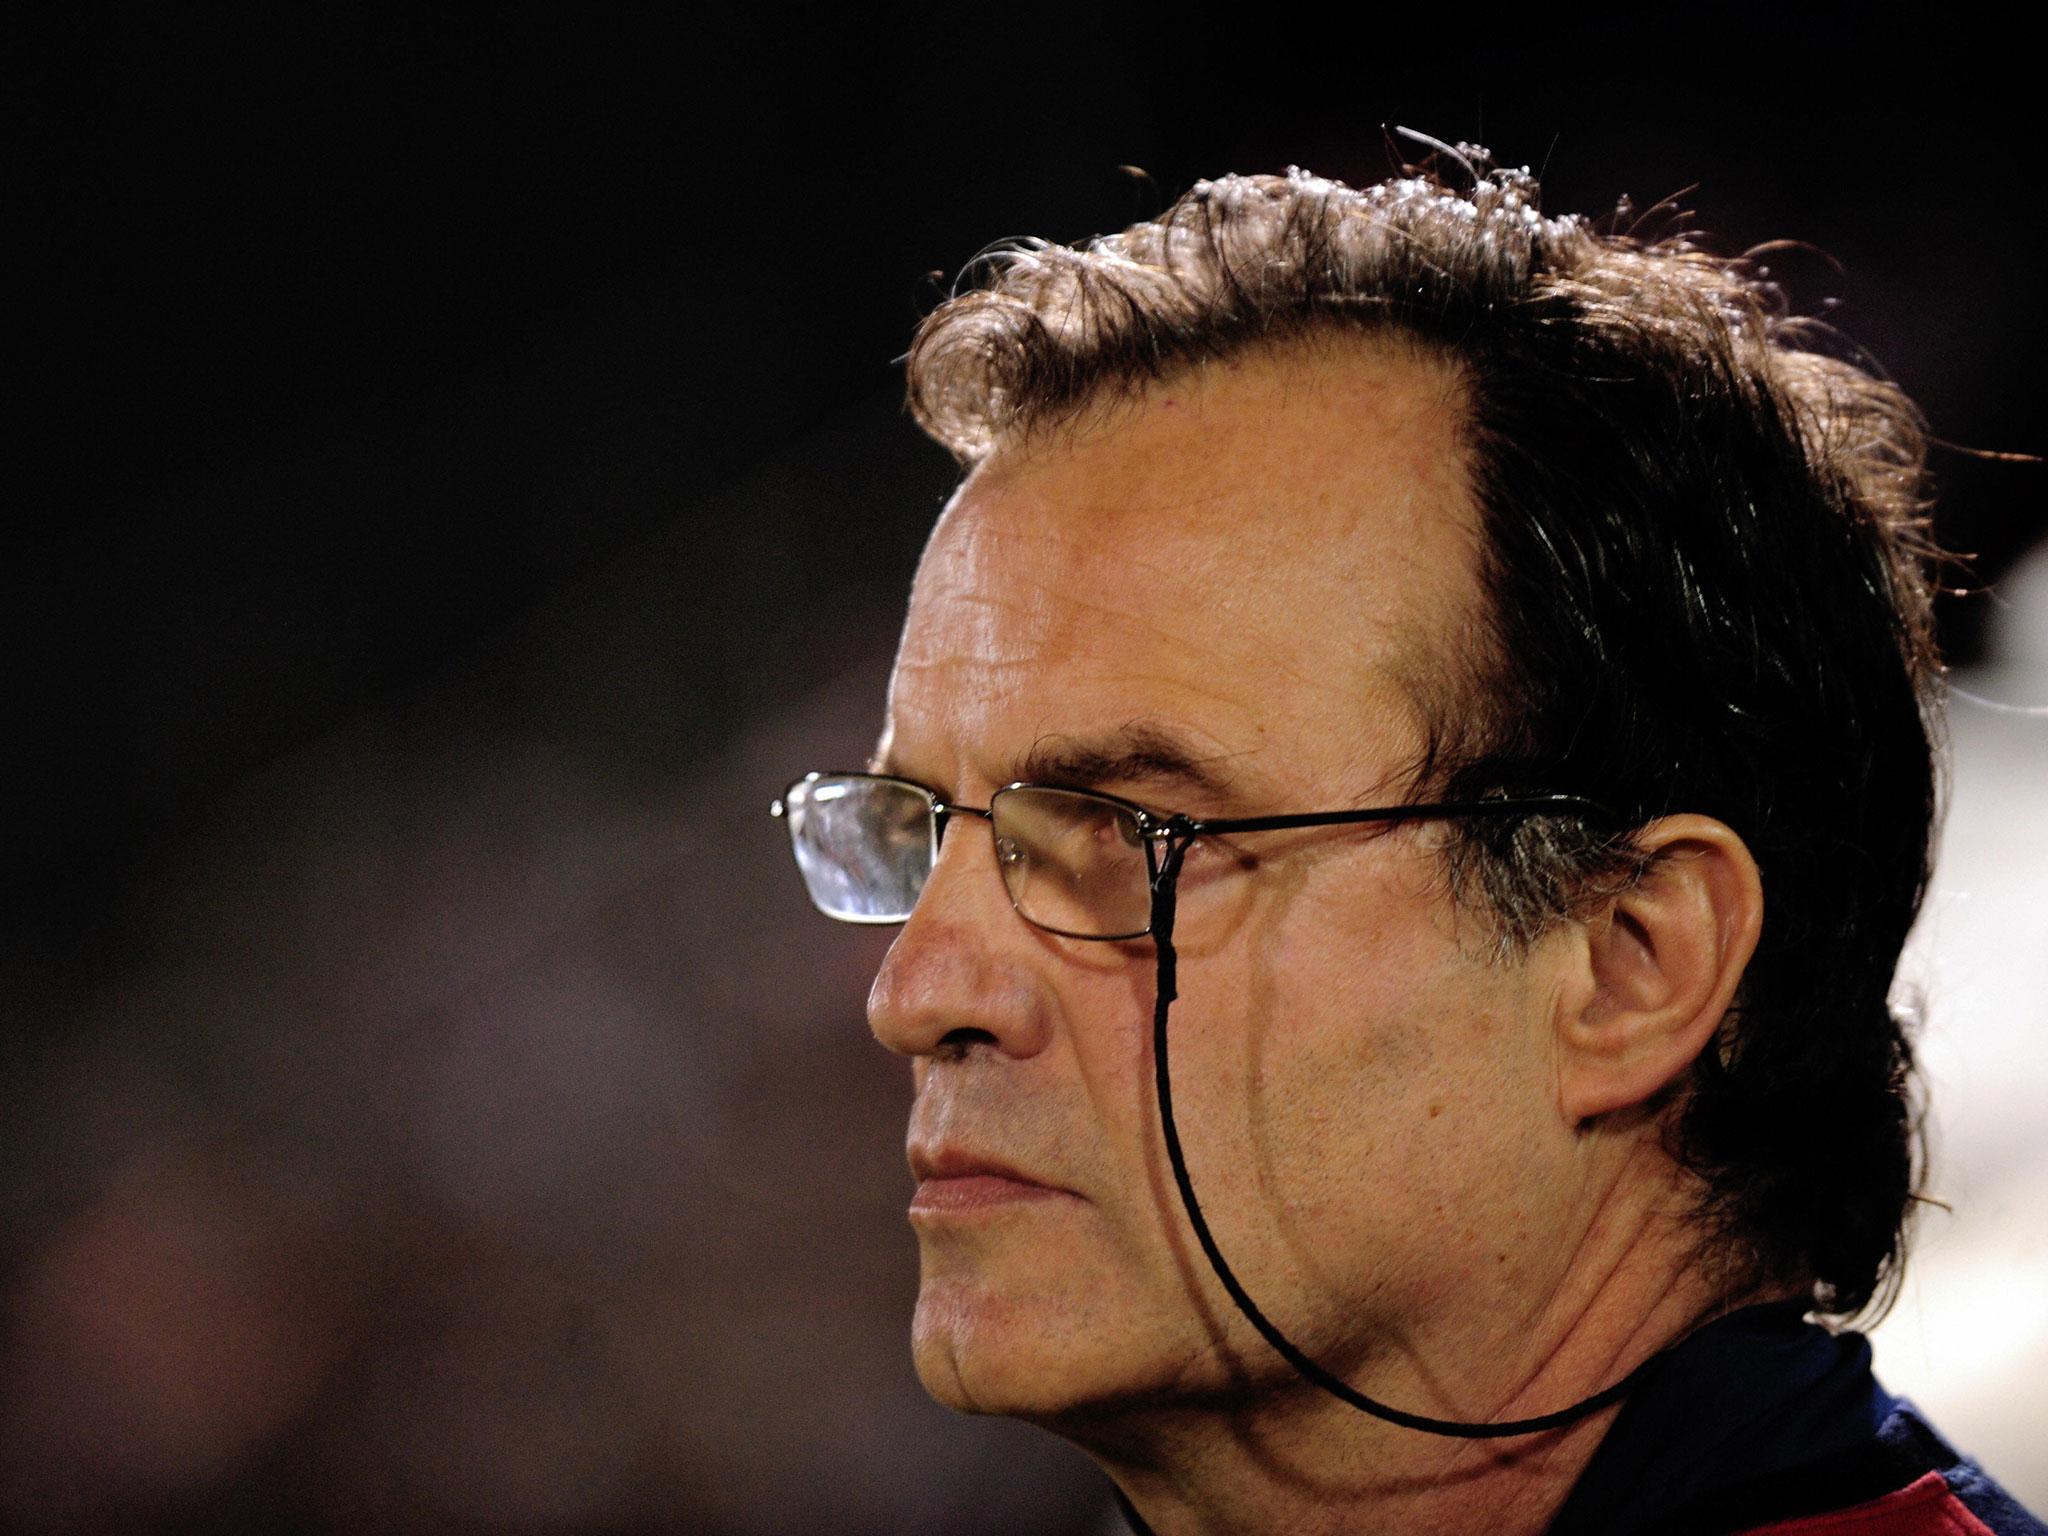 Marcelo Bielsa established a legacy with Chile which continues to bear fruits to this very day